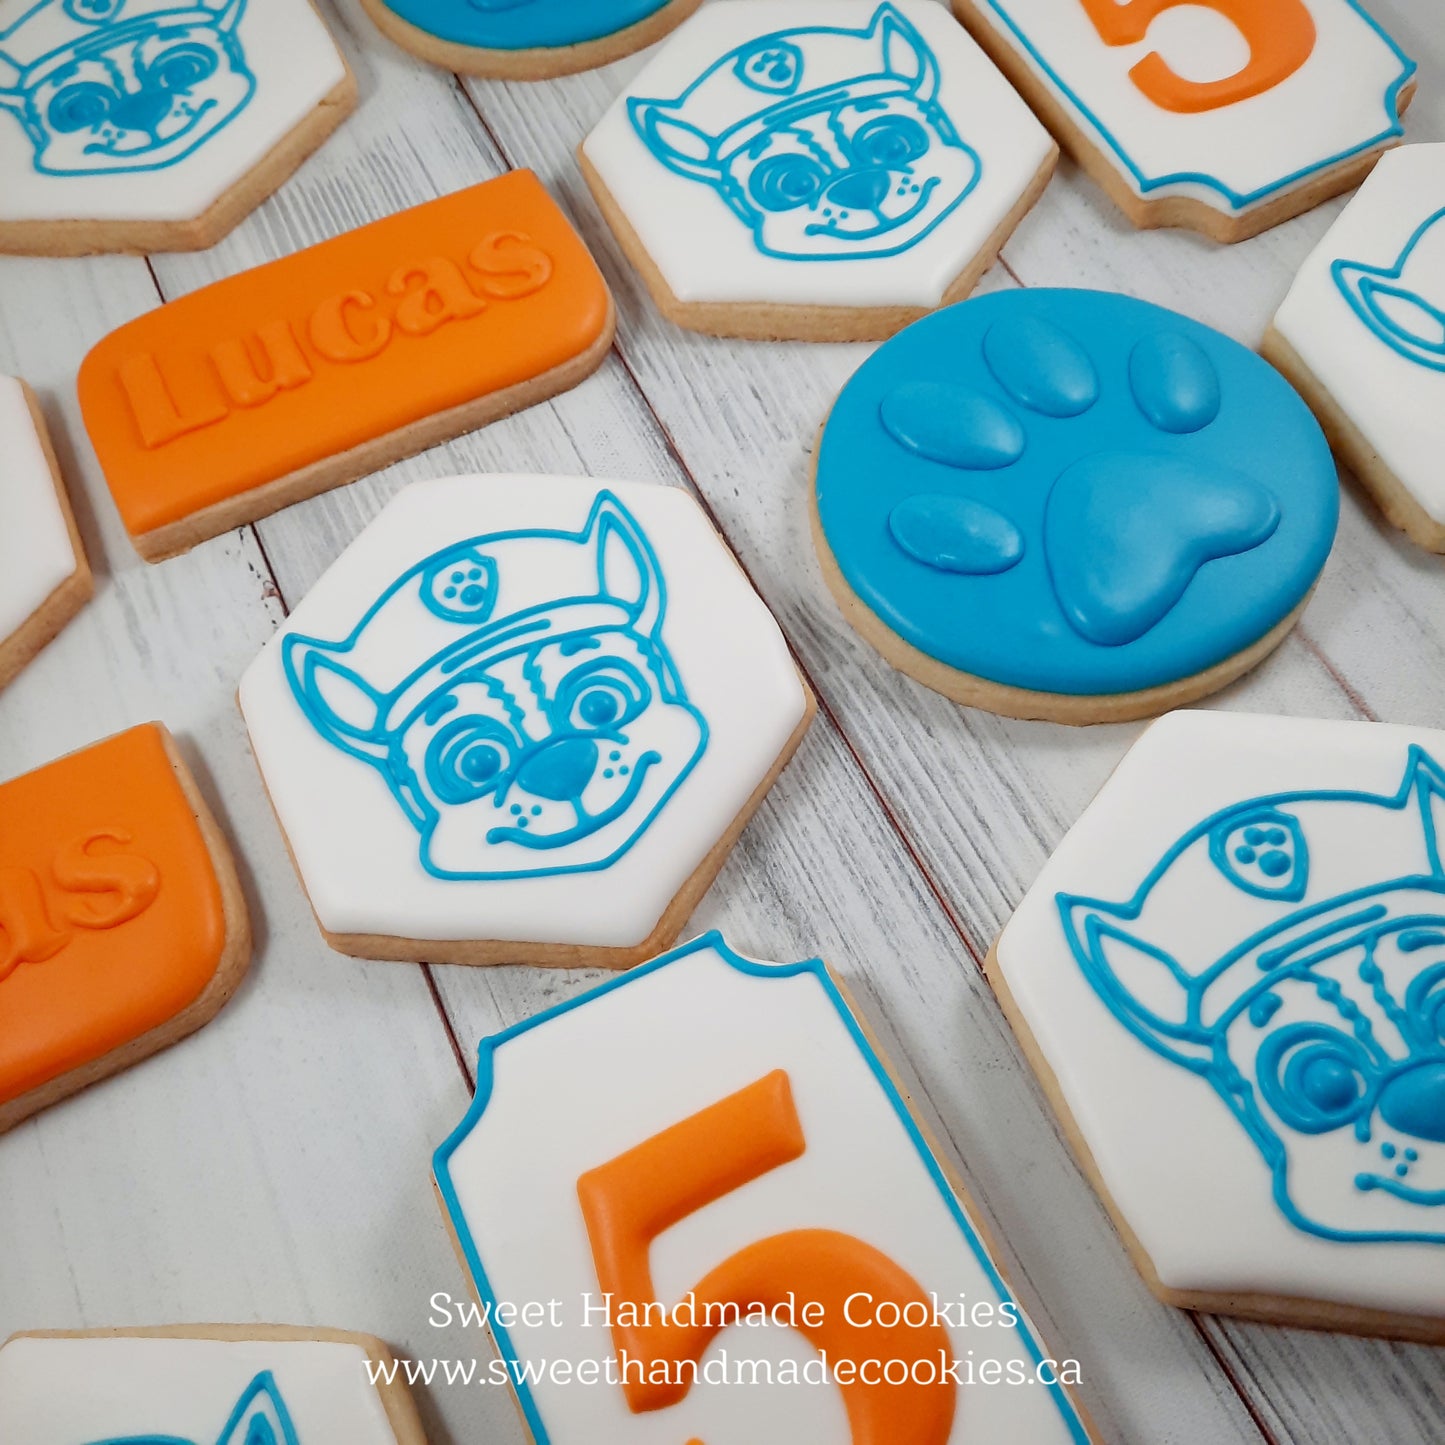 Paw Patrol Cookies for a 5th Birthday